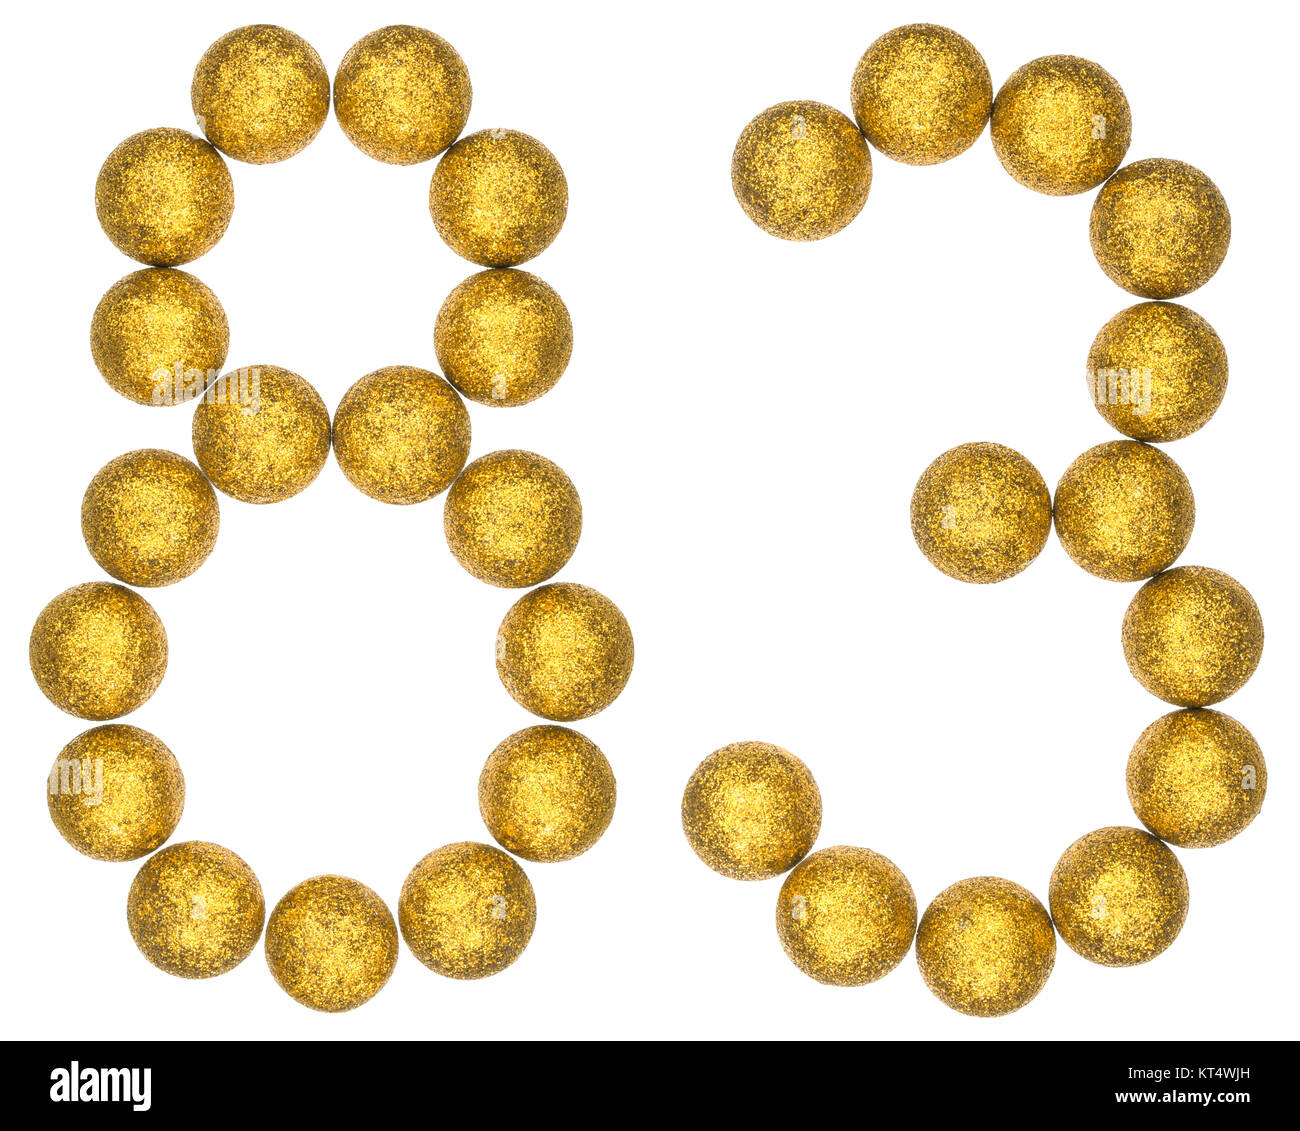 Numeral 83, eighty three, from decorative balls, isolated on white background Stock Photo